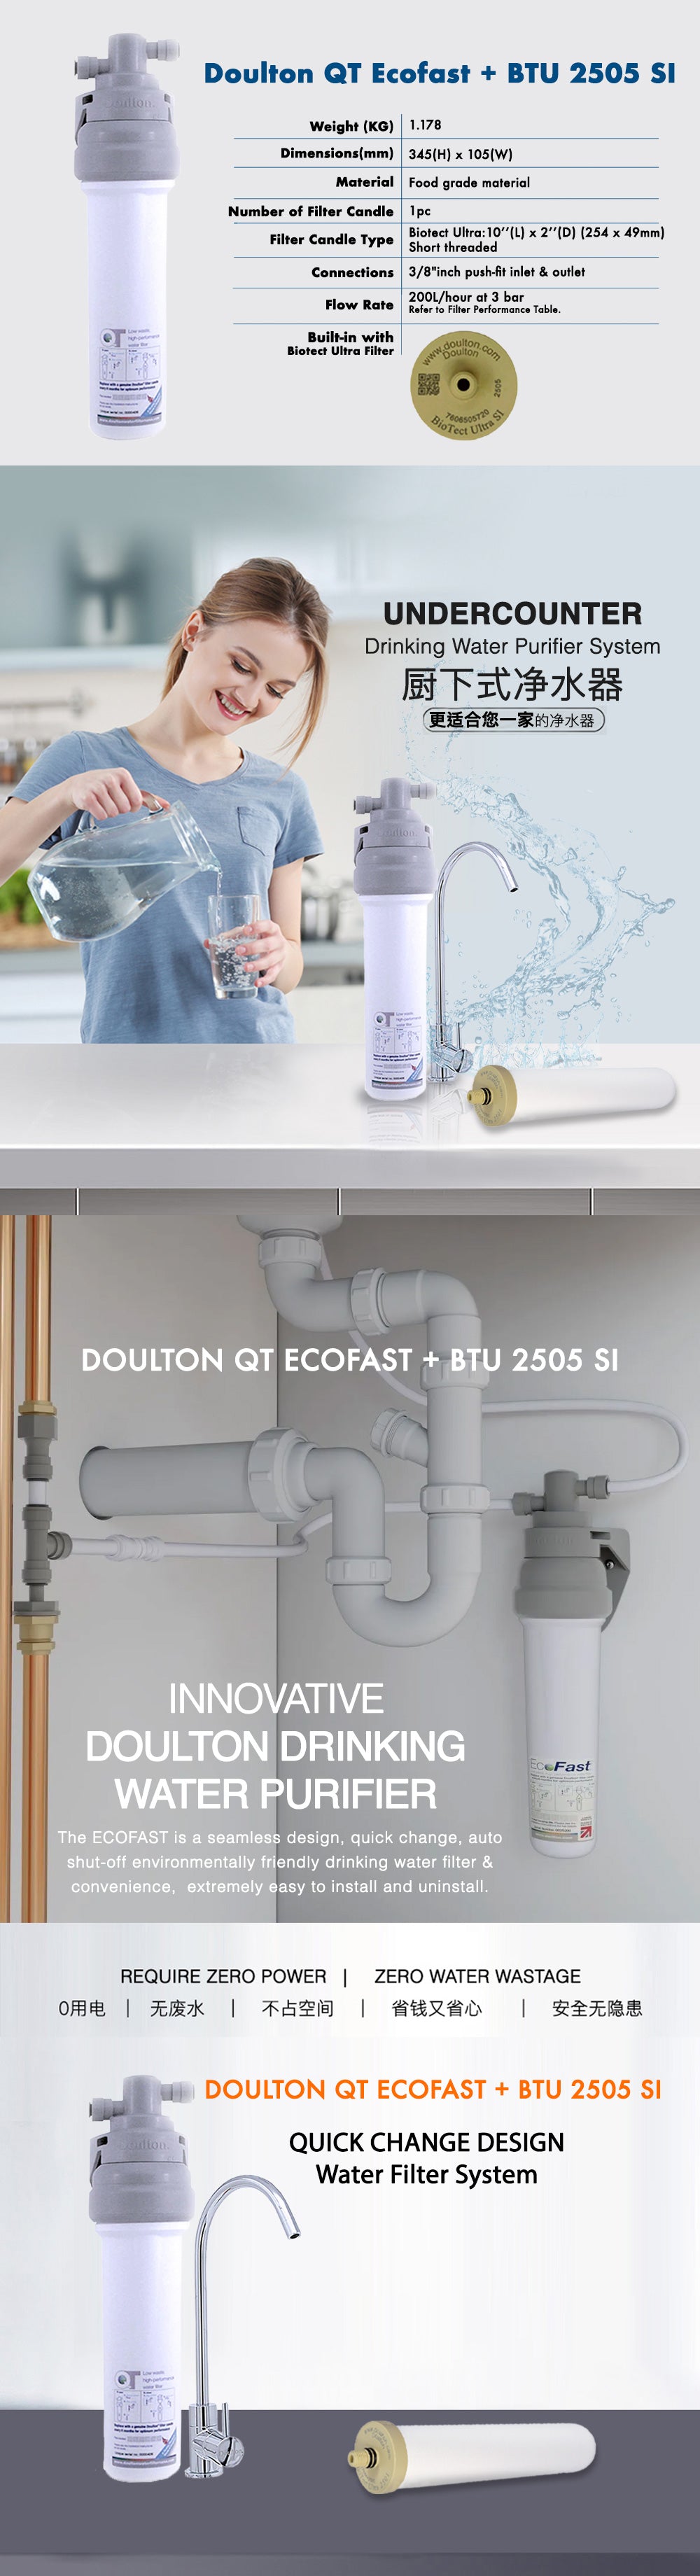 Doulton QT Ecofast + BTU 2505 SI (ANTI-SCALE) (IN)Undercounter Drinking Water Purifier System